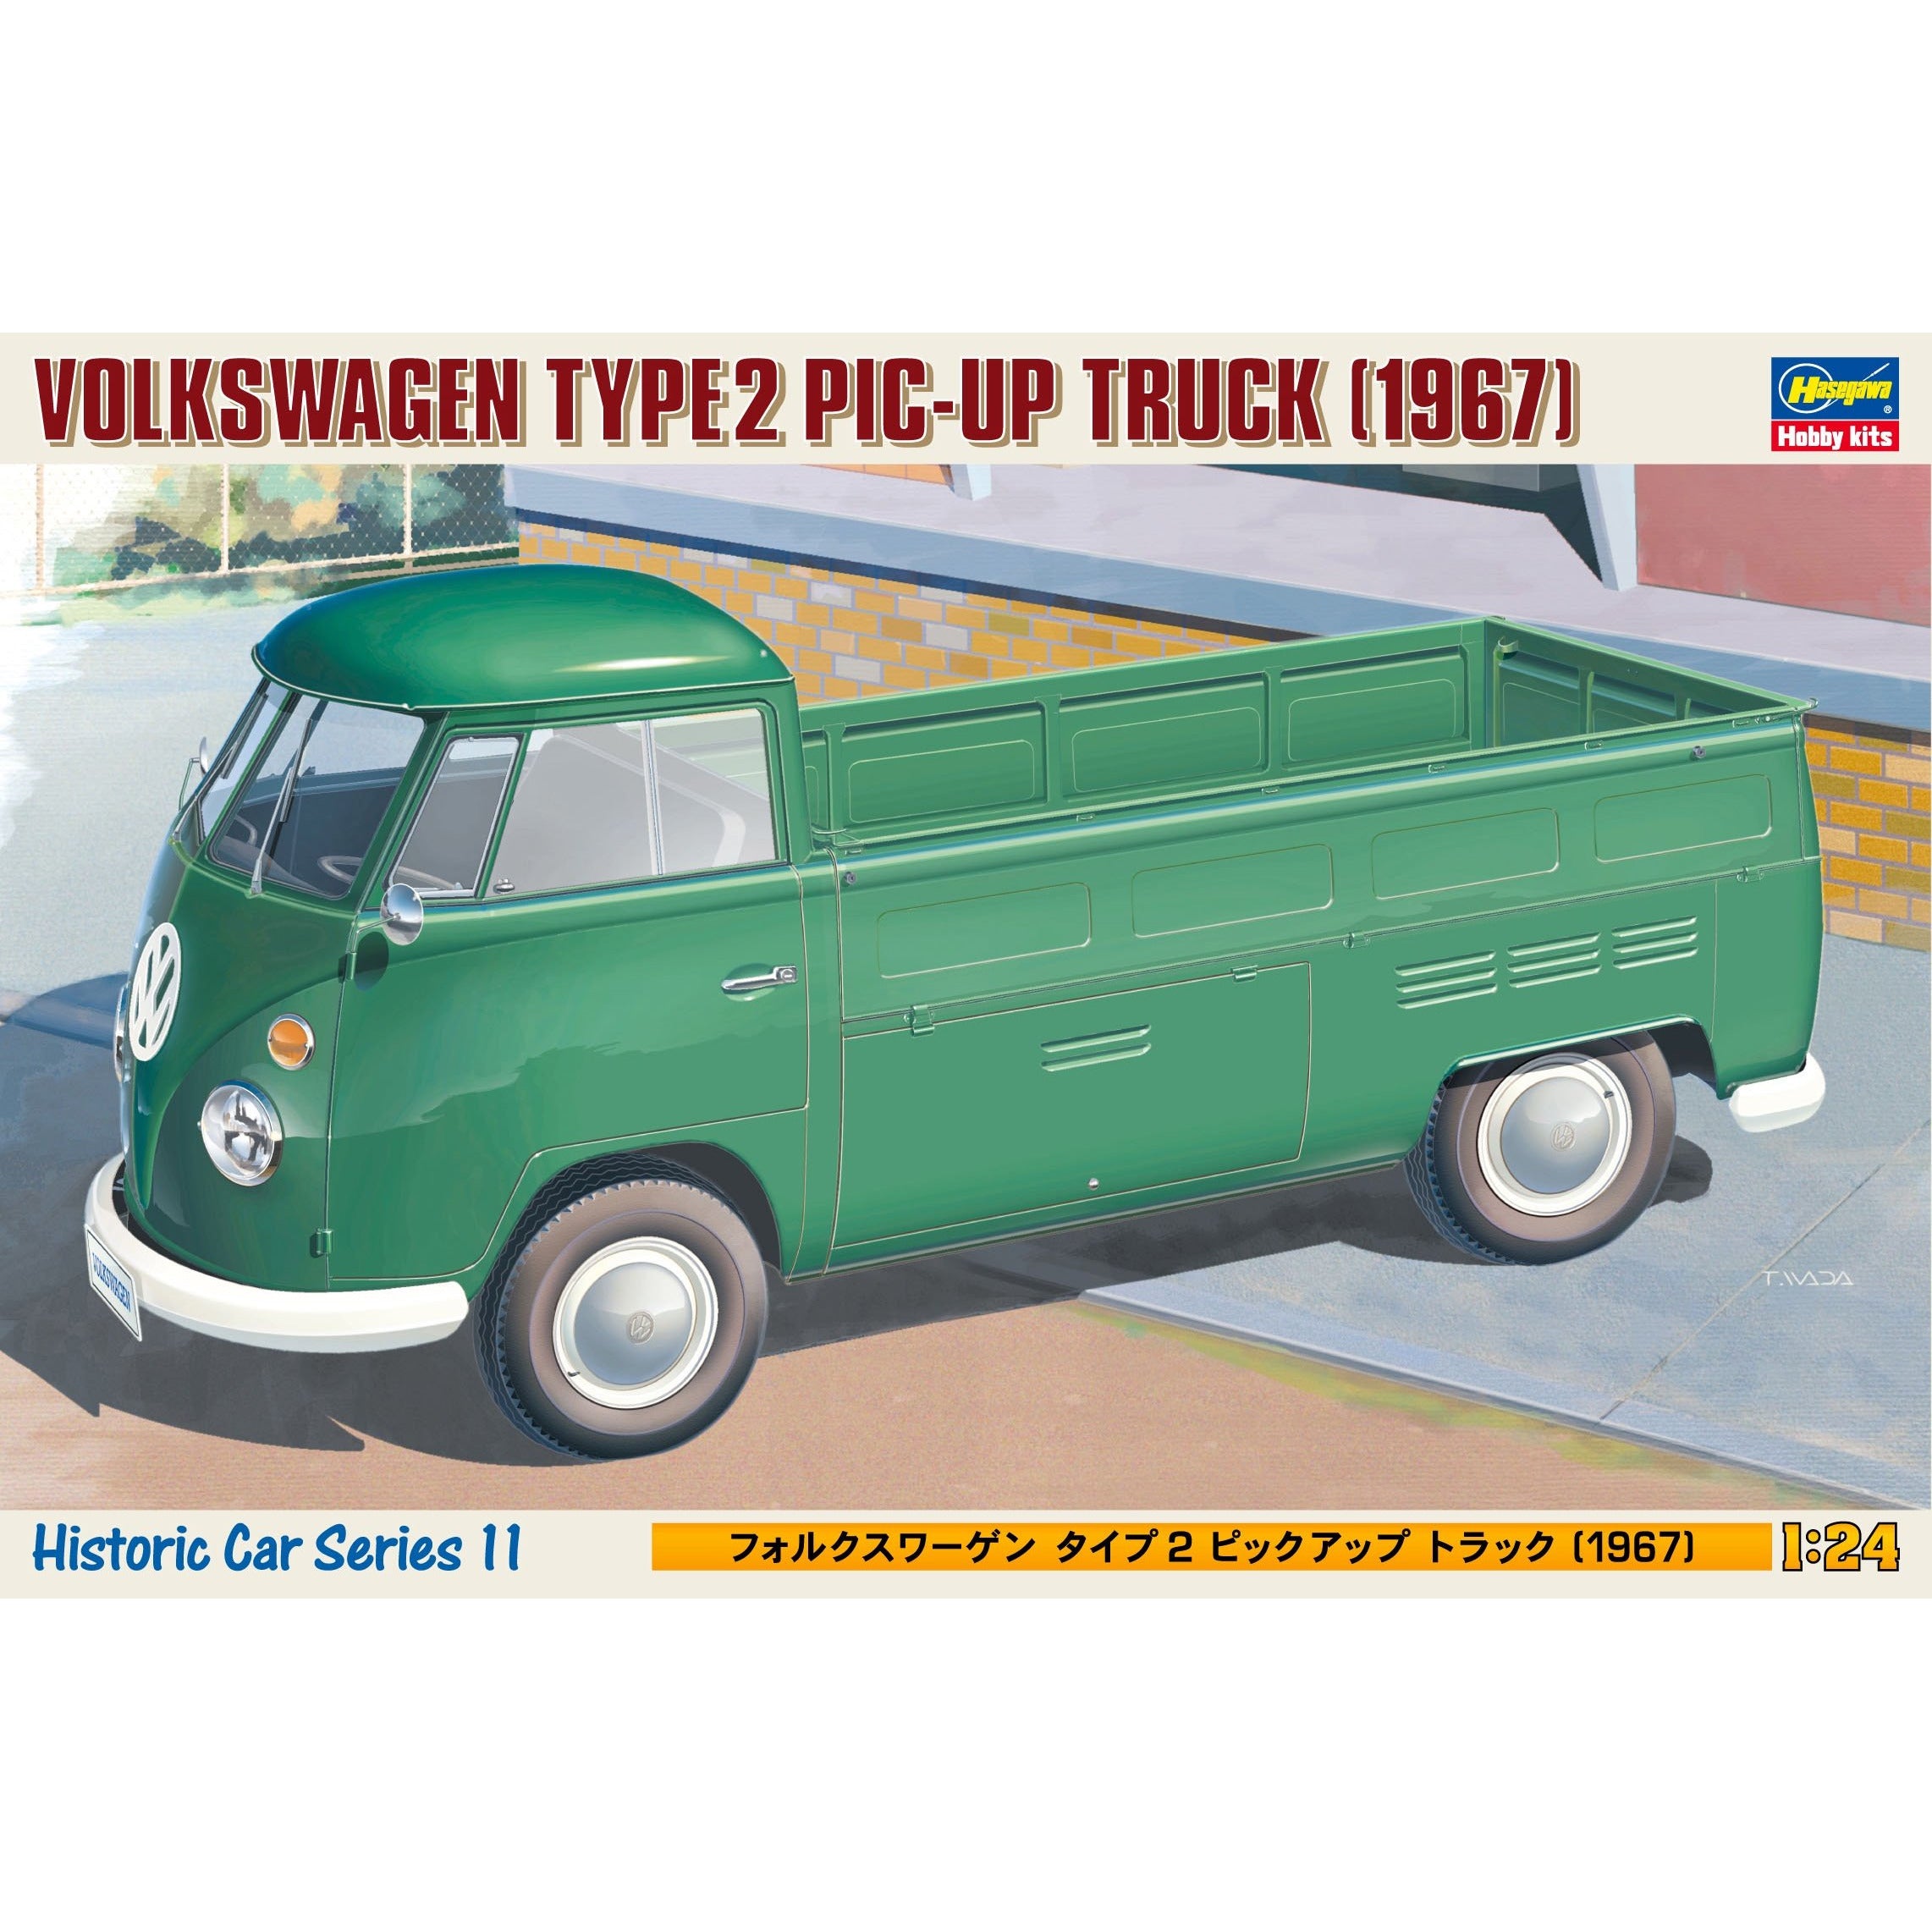 Volkswagen Type 2 Pic-Up Truck "1967" HC-11 1/24 Model Car Kit #21211 by Hasegawa